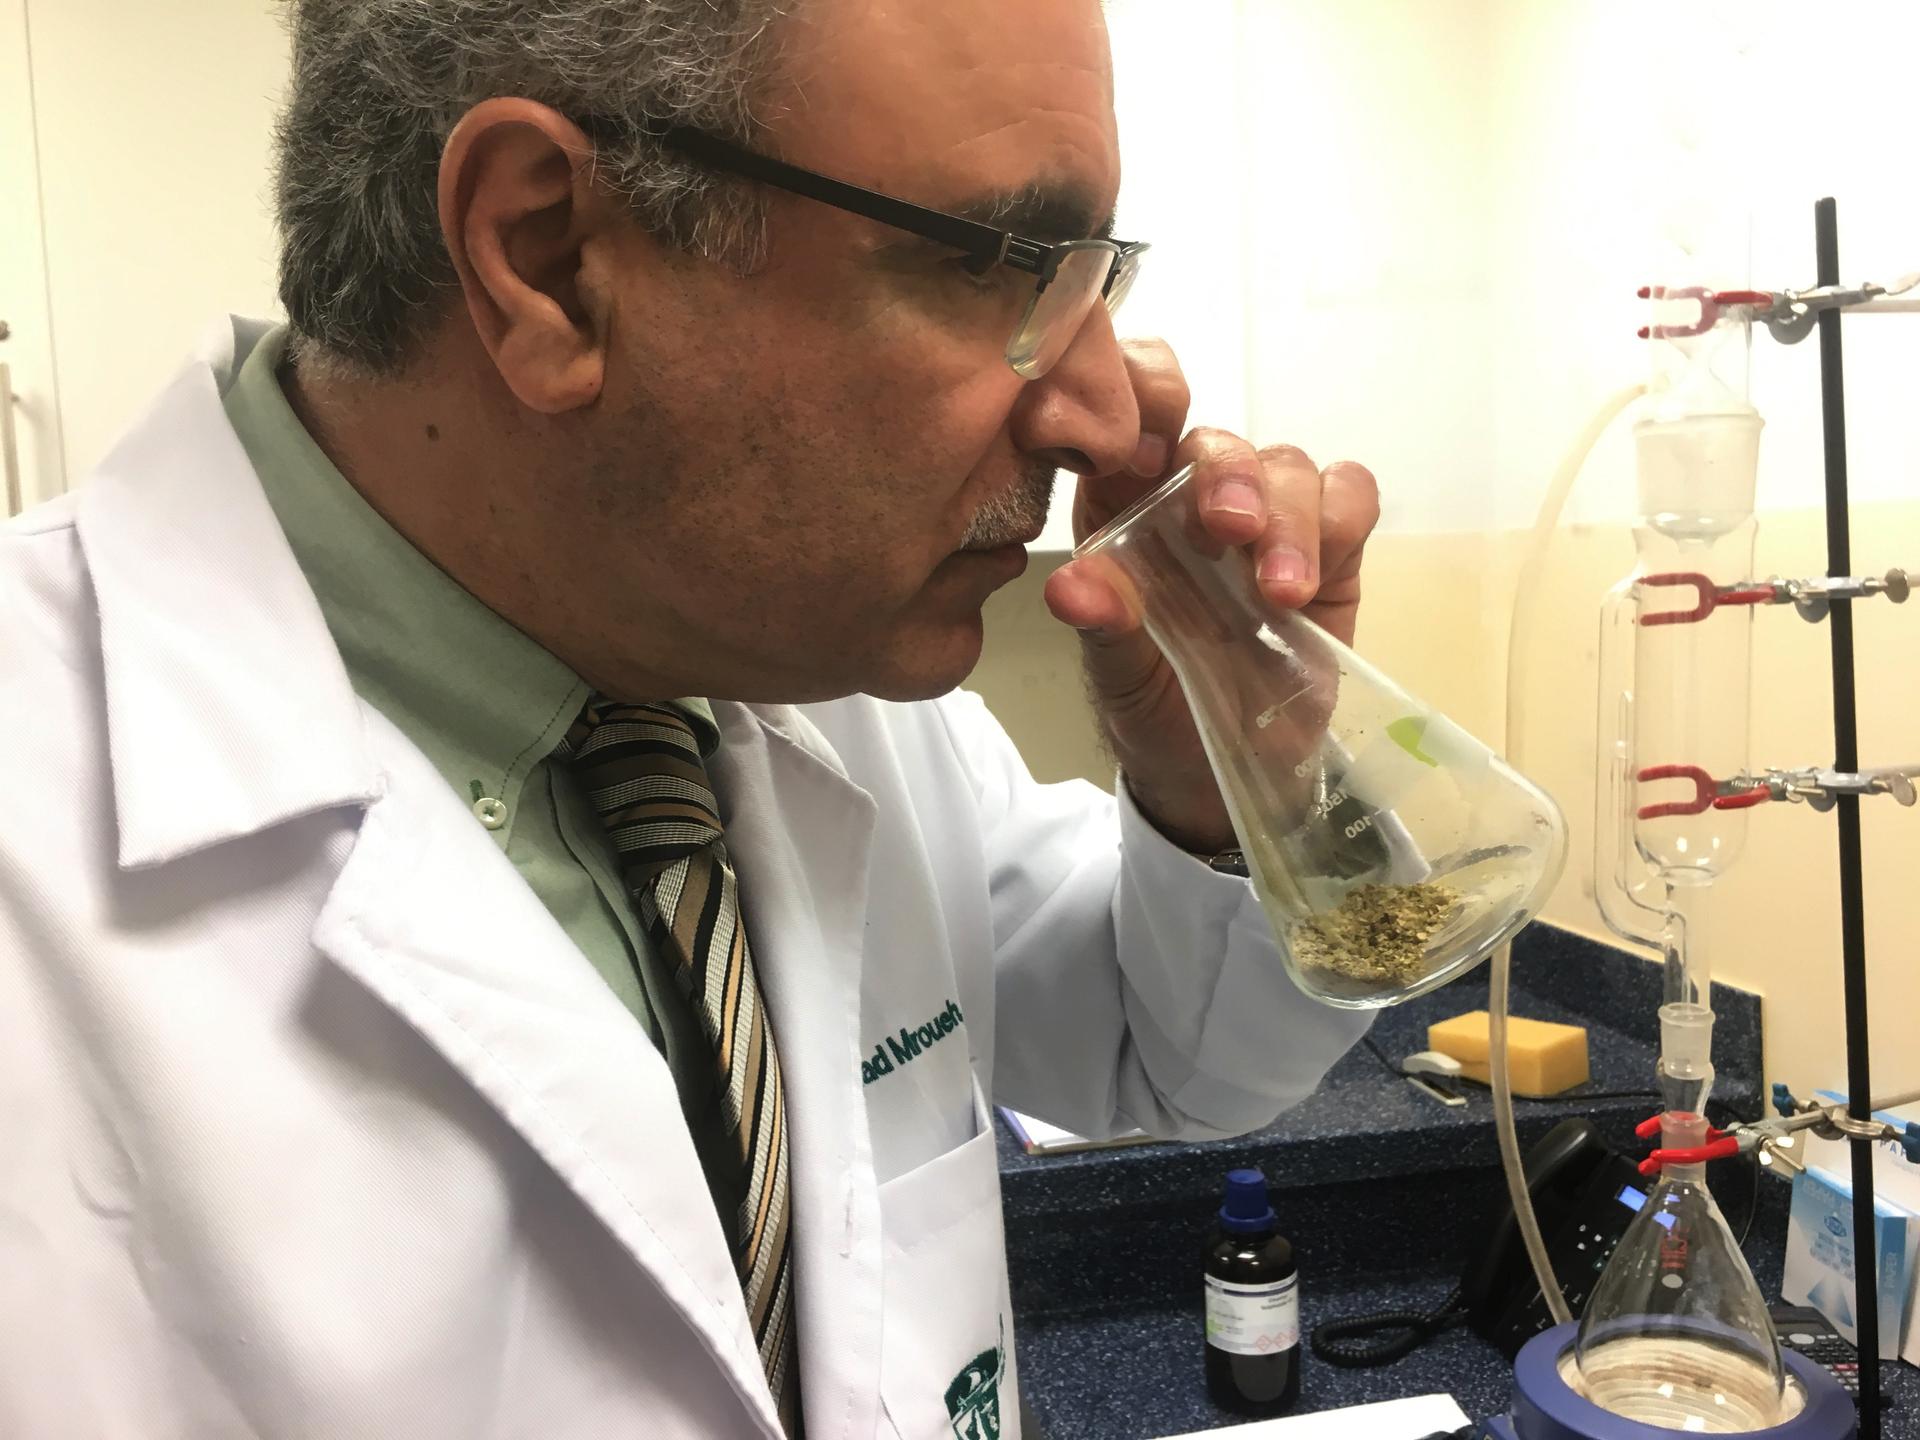 a man in a lab coat smelling cannabis from a. test tube